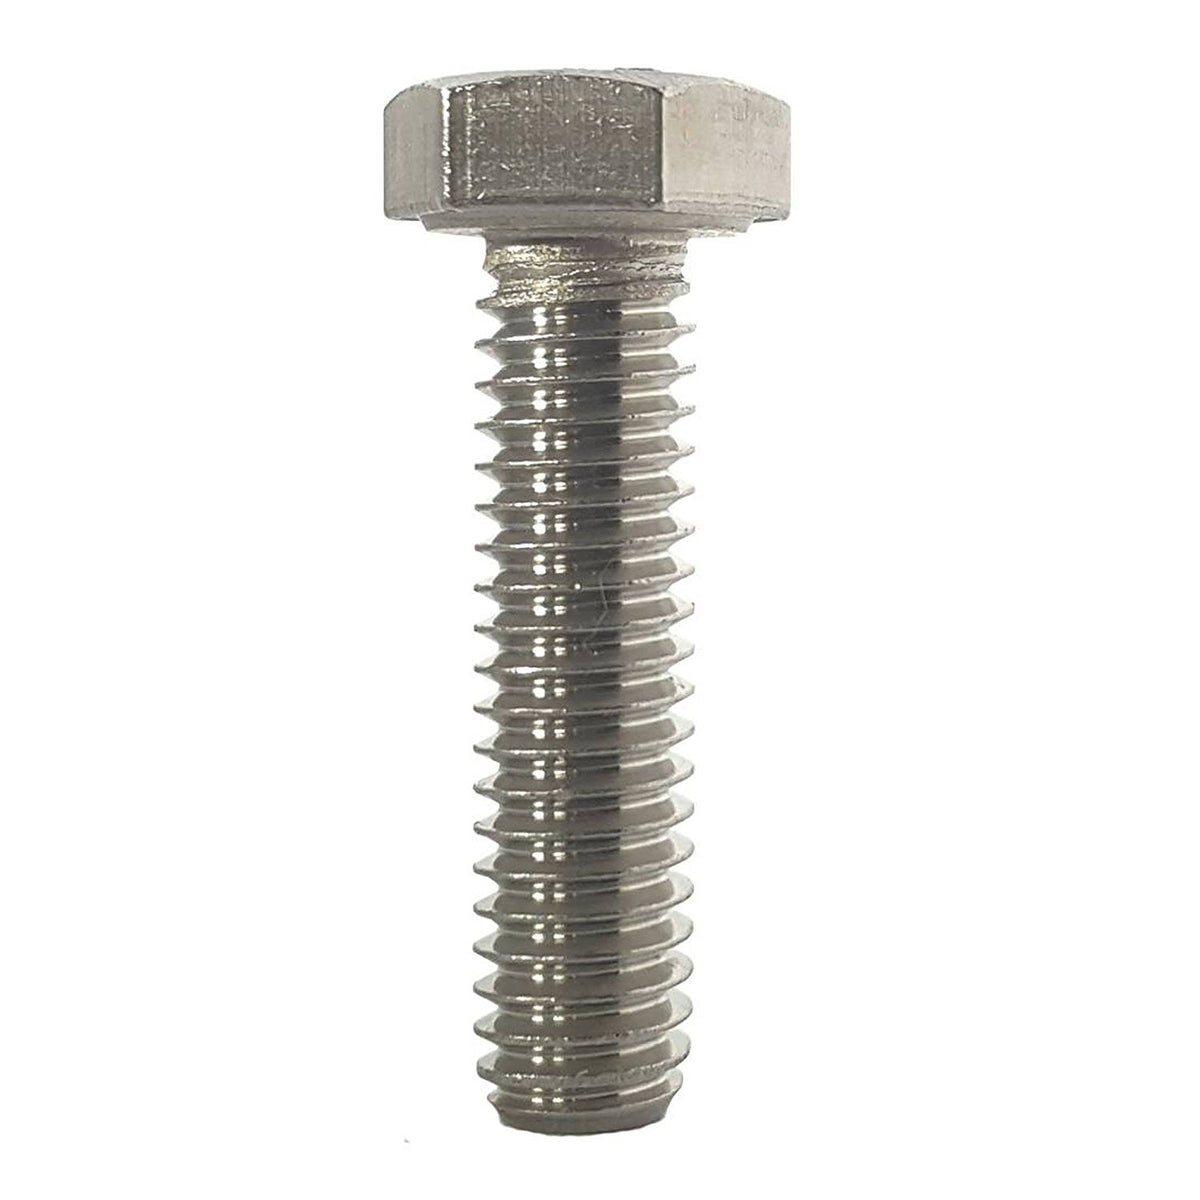 38 16 X 1 34 Hex Head Tap Bolts Fully Threaded Stainless Steel 18 8 Qty 10 Fastenere